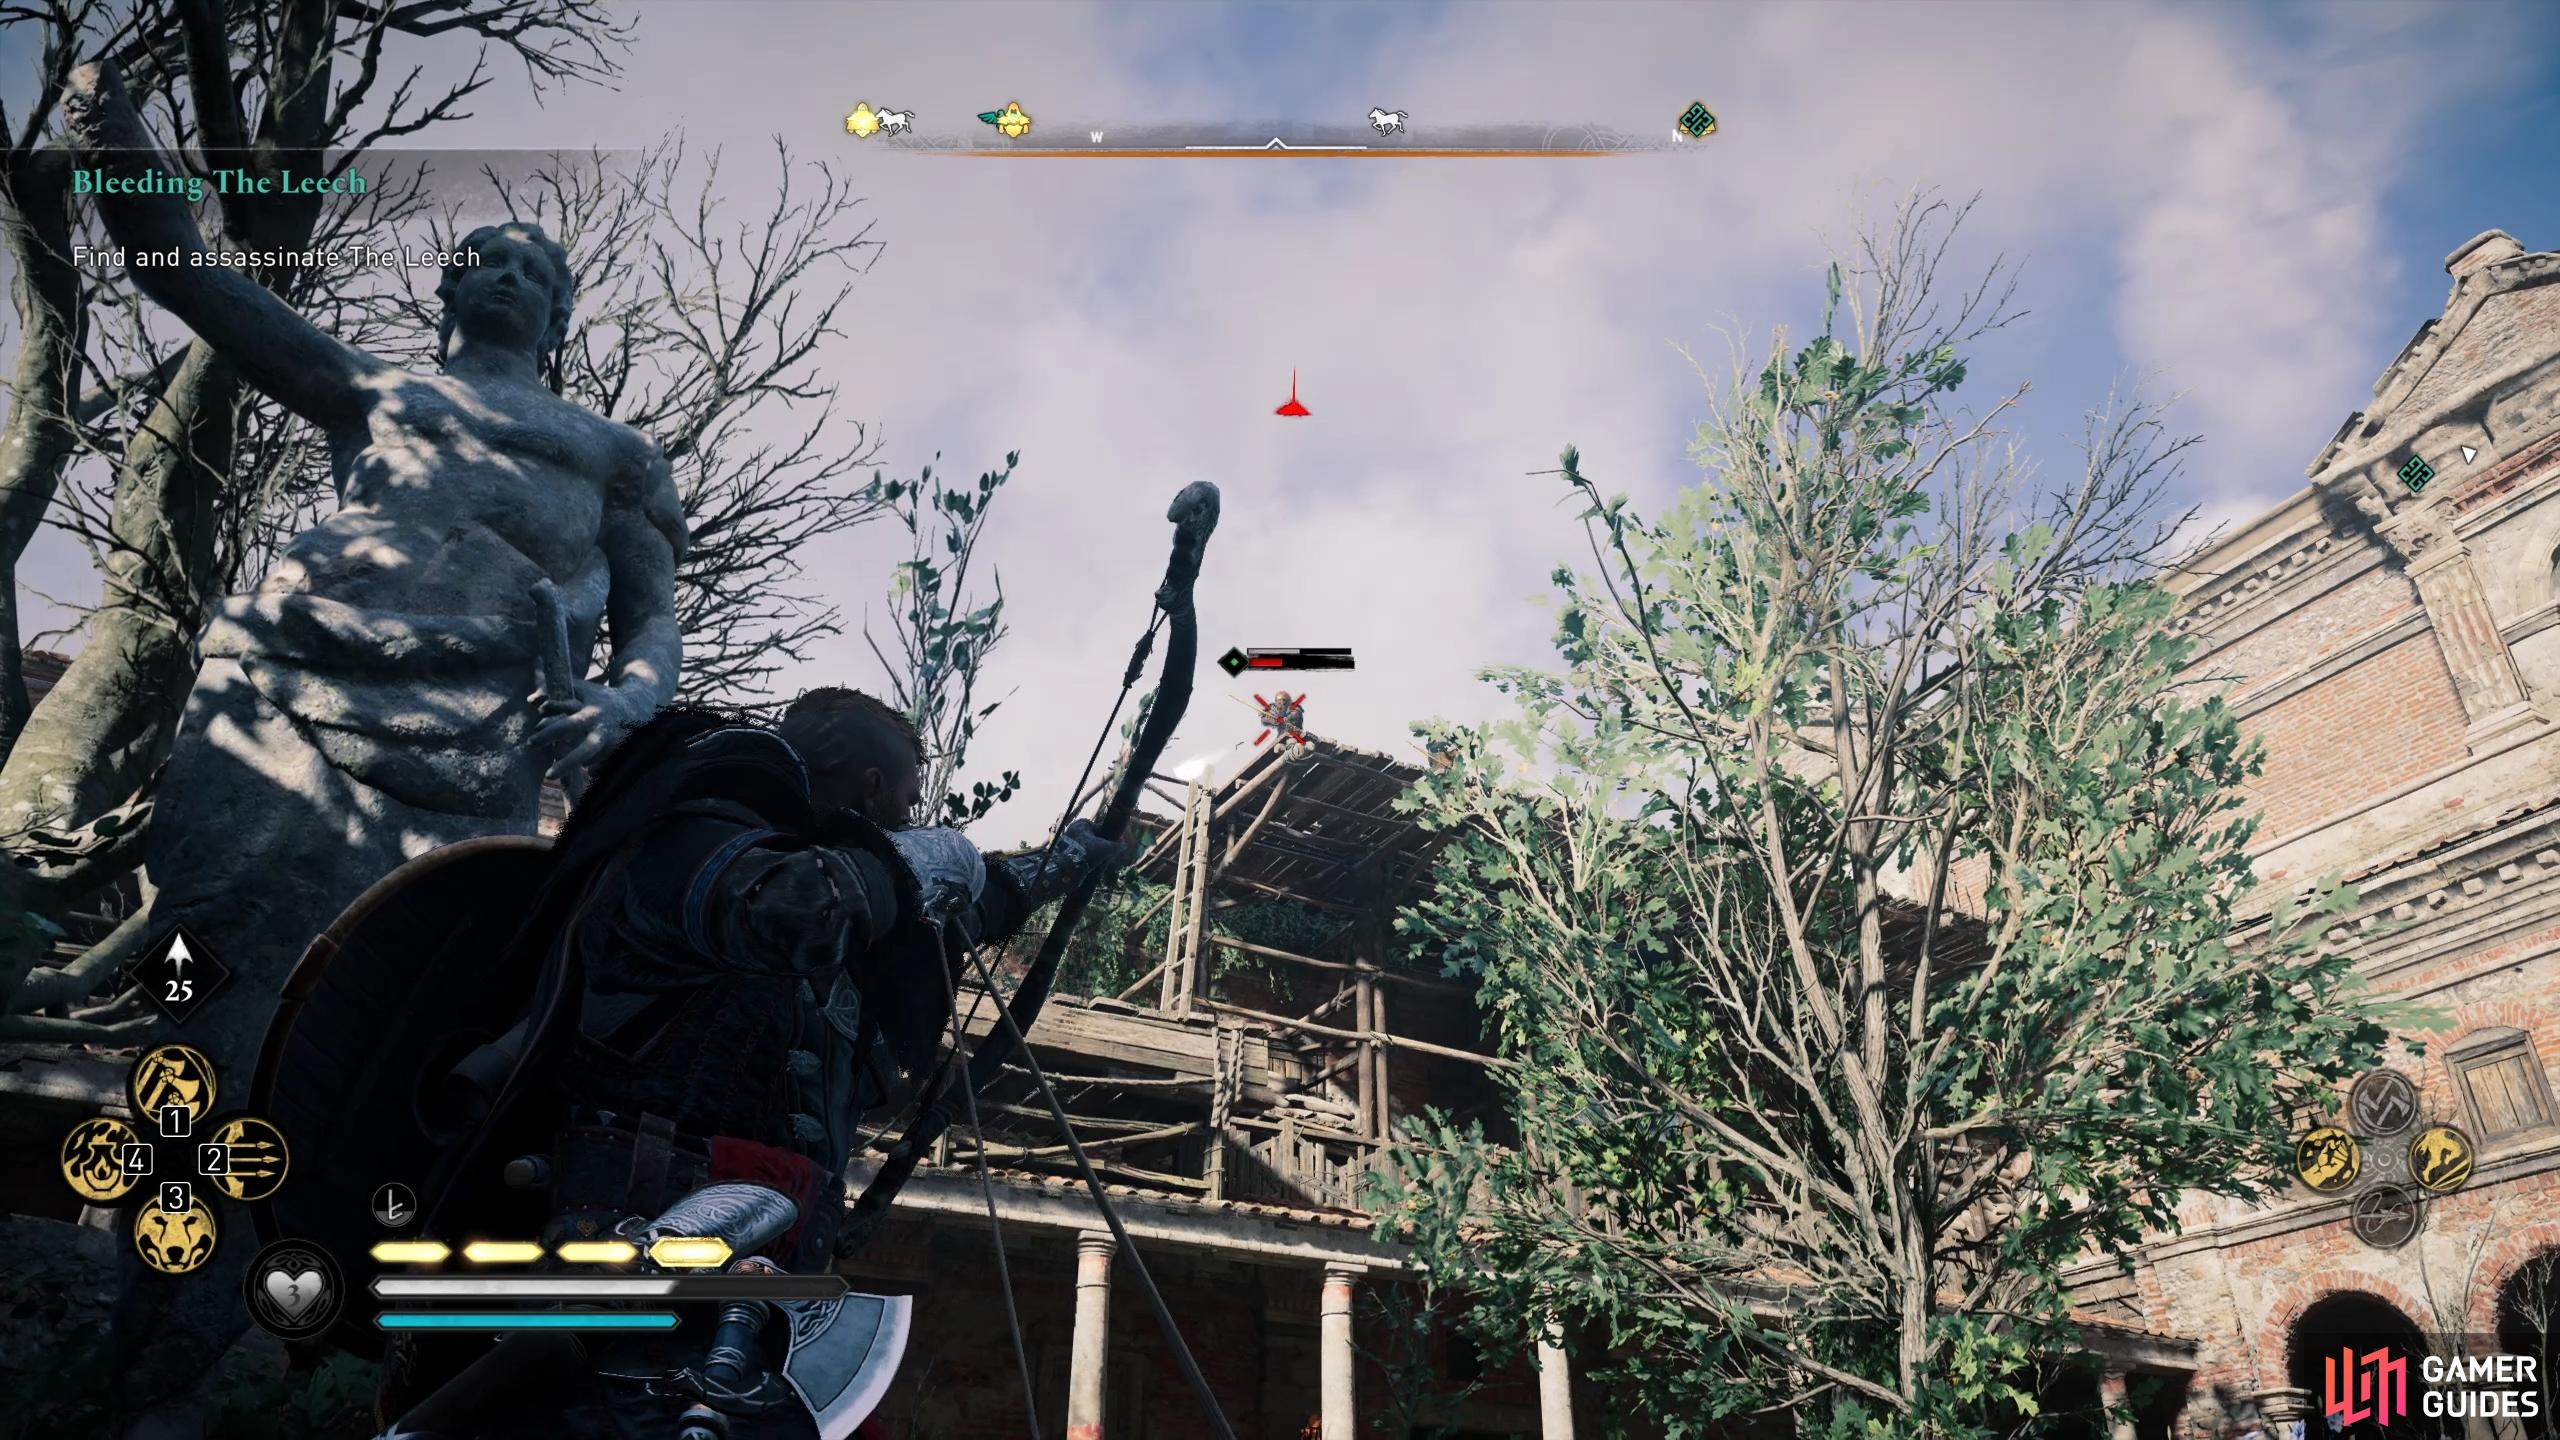 You'll find a number of archers on the rooftops surrounding the courtyard.